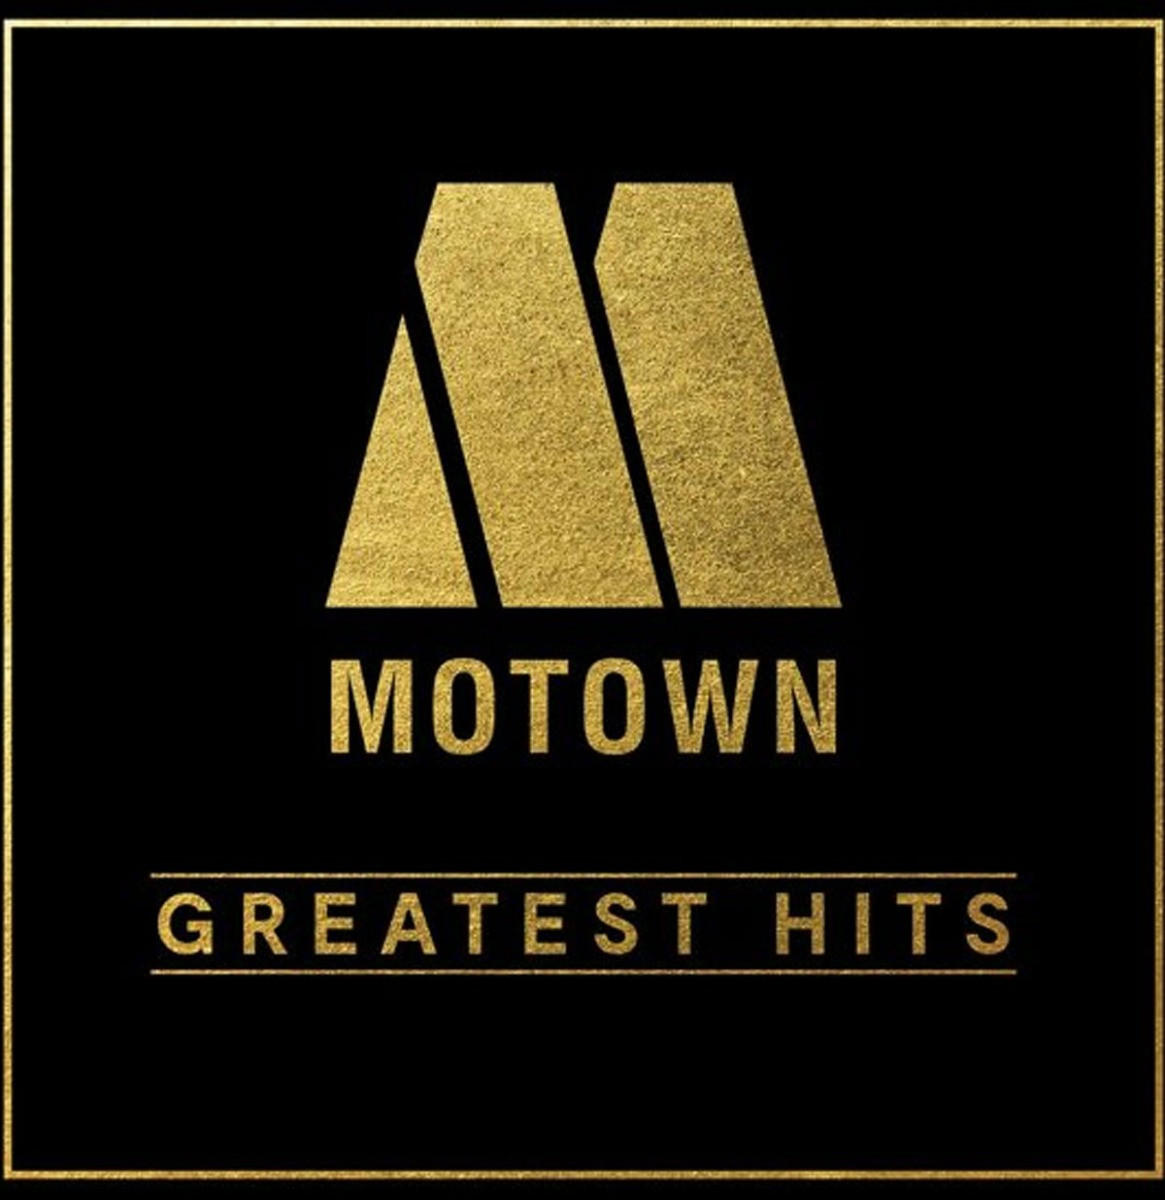 Motown - Greatest Hits 2 LP - 60th Anniversary Edition